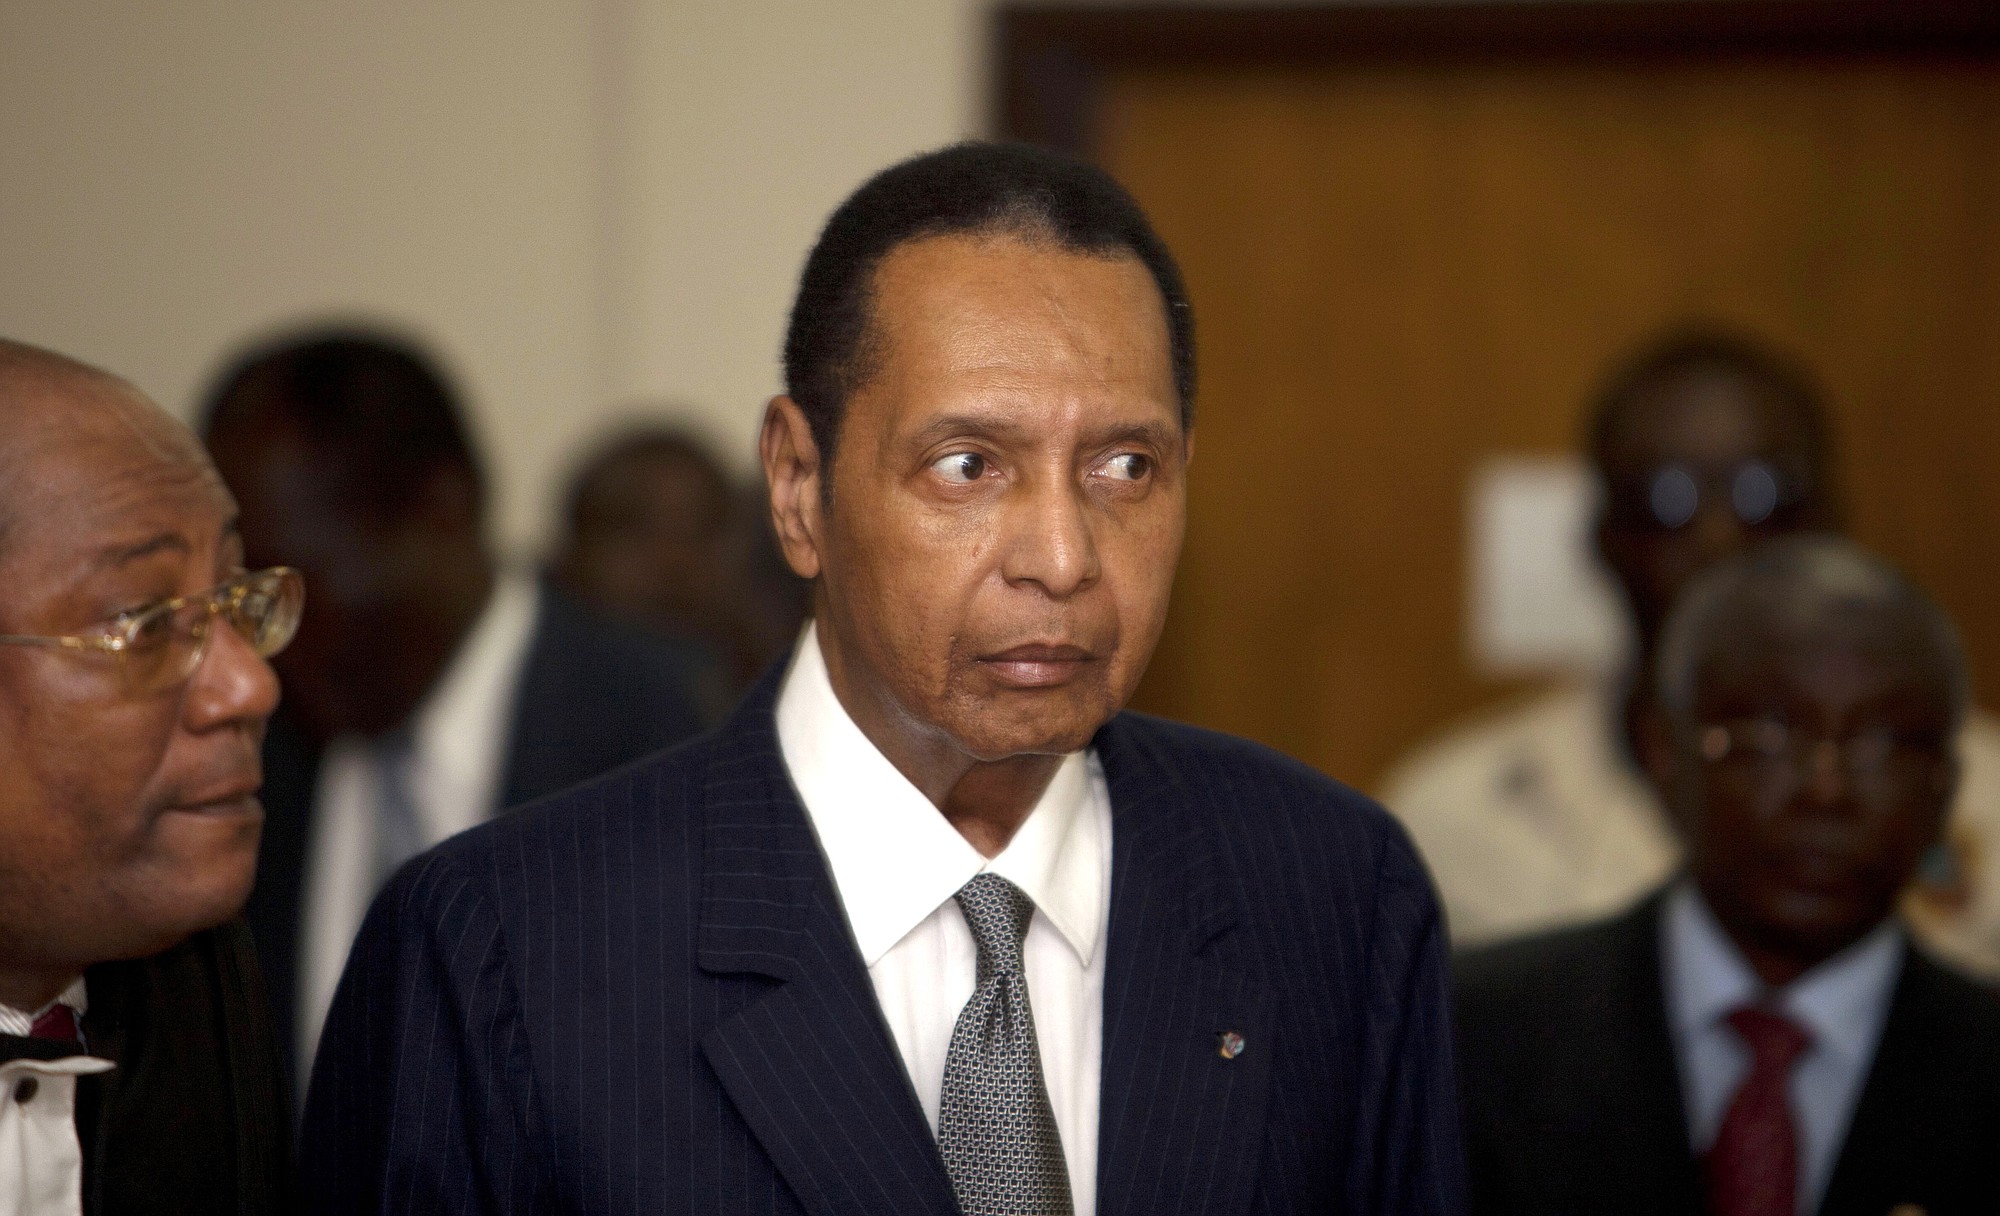 Former Haitian dictator Jean-Claude Duvalier, known as &quot;Baby Doc,&quot; attends his hearing Feb. 28, 2013 at court in Port-au-Prince, Haiti, as Haitian authorities charged Duvalier with human rights abuses and embezzlement but a judge ruled he should face charges only for the alleged financial crimes.